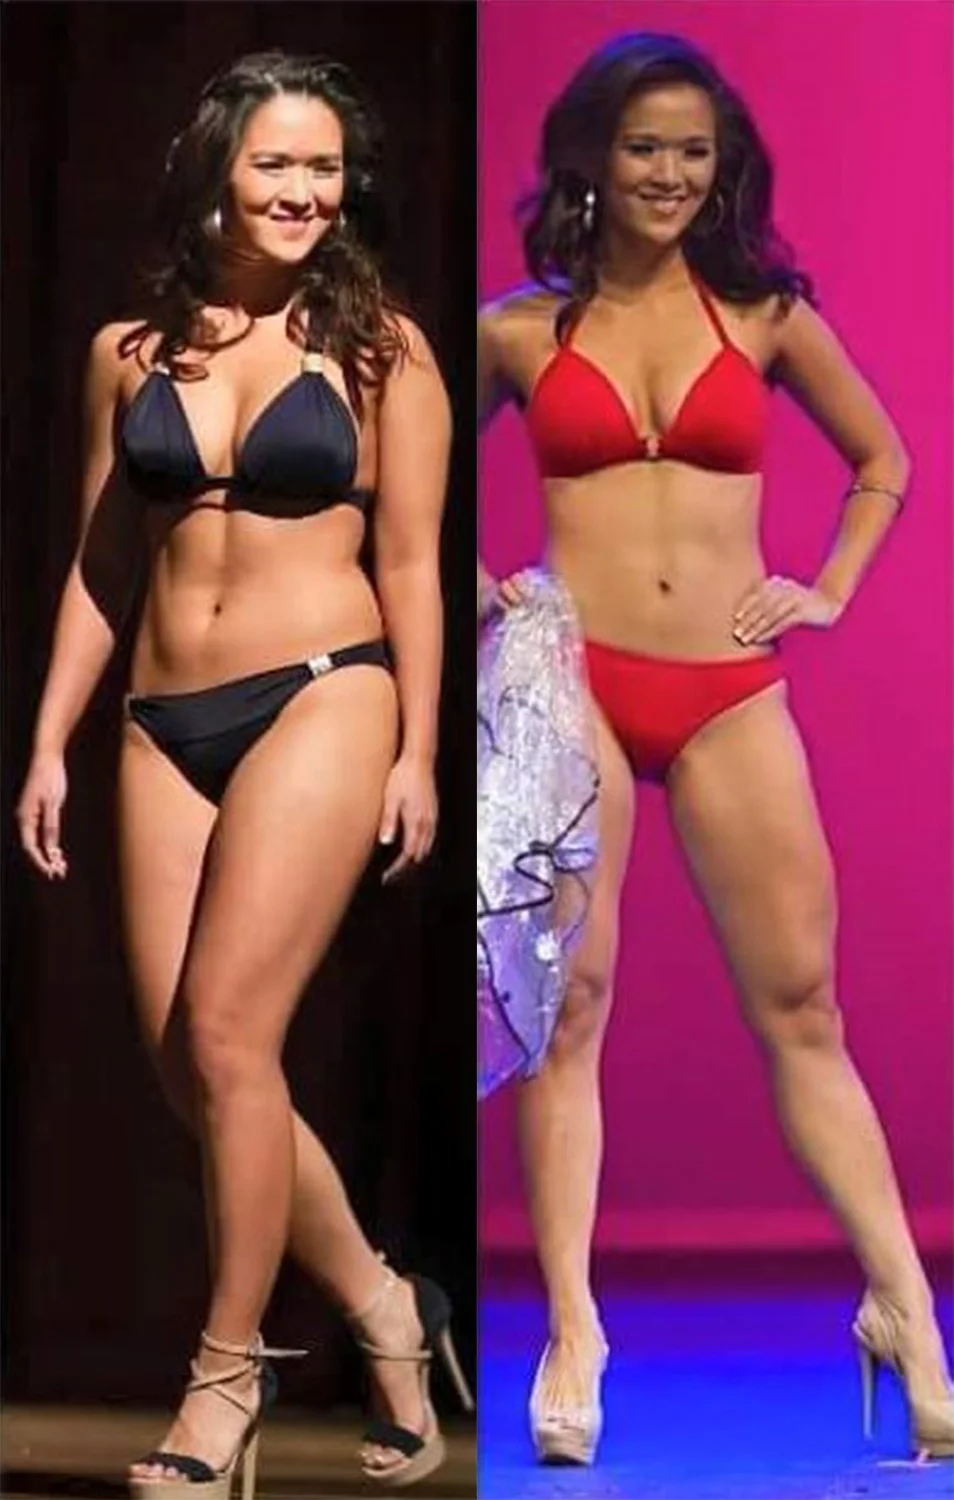 girl before and after pageant image